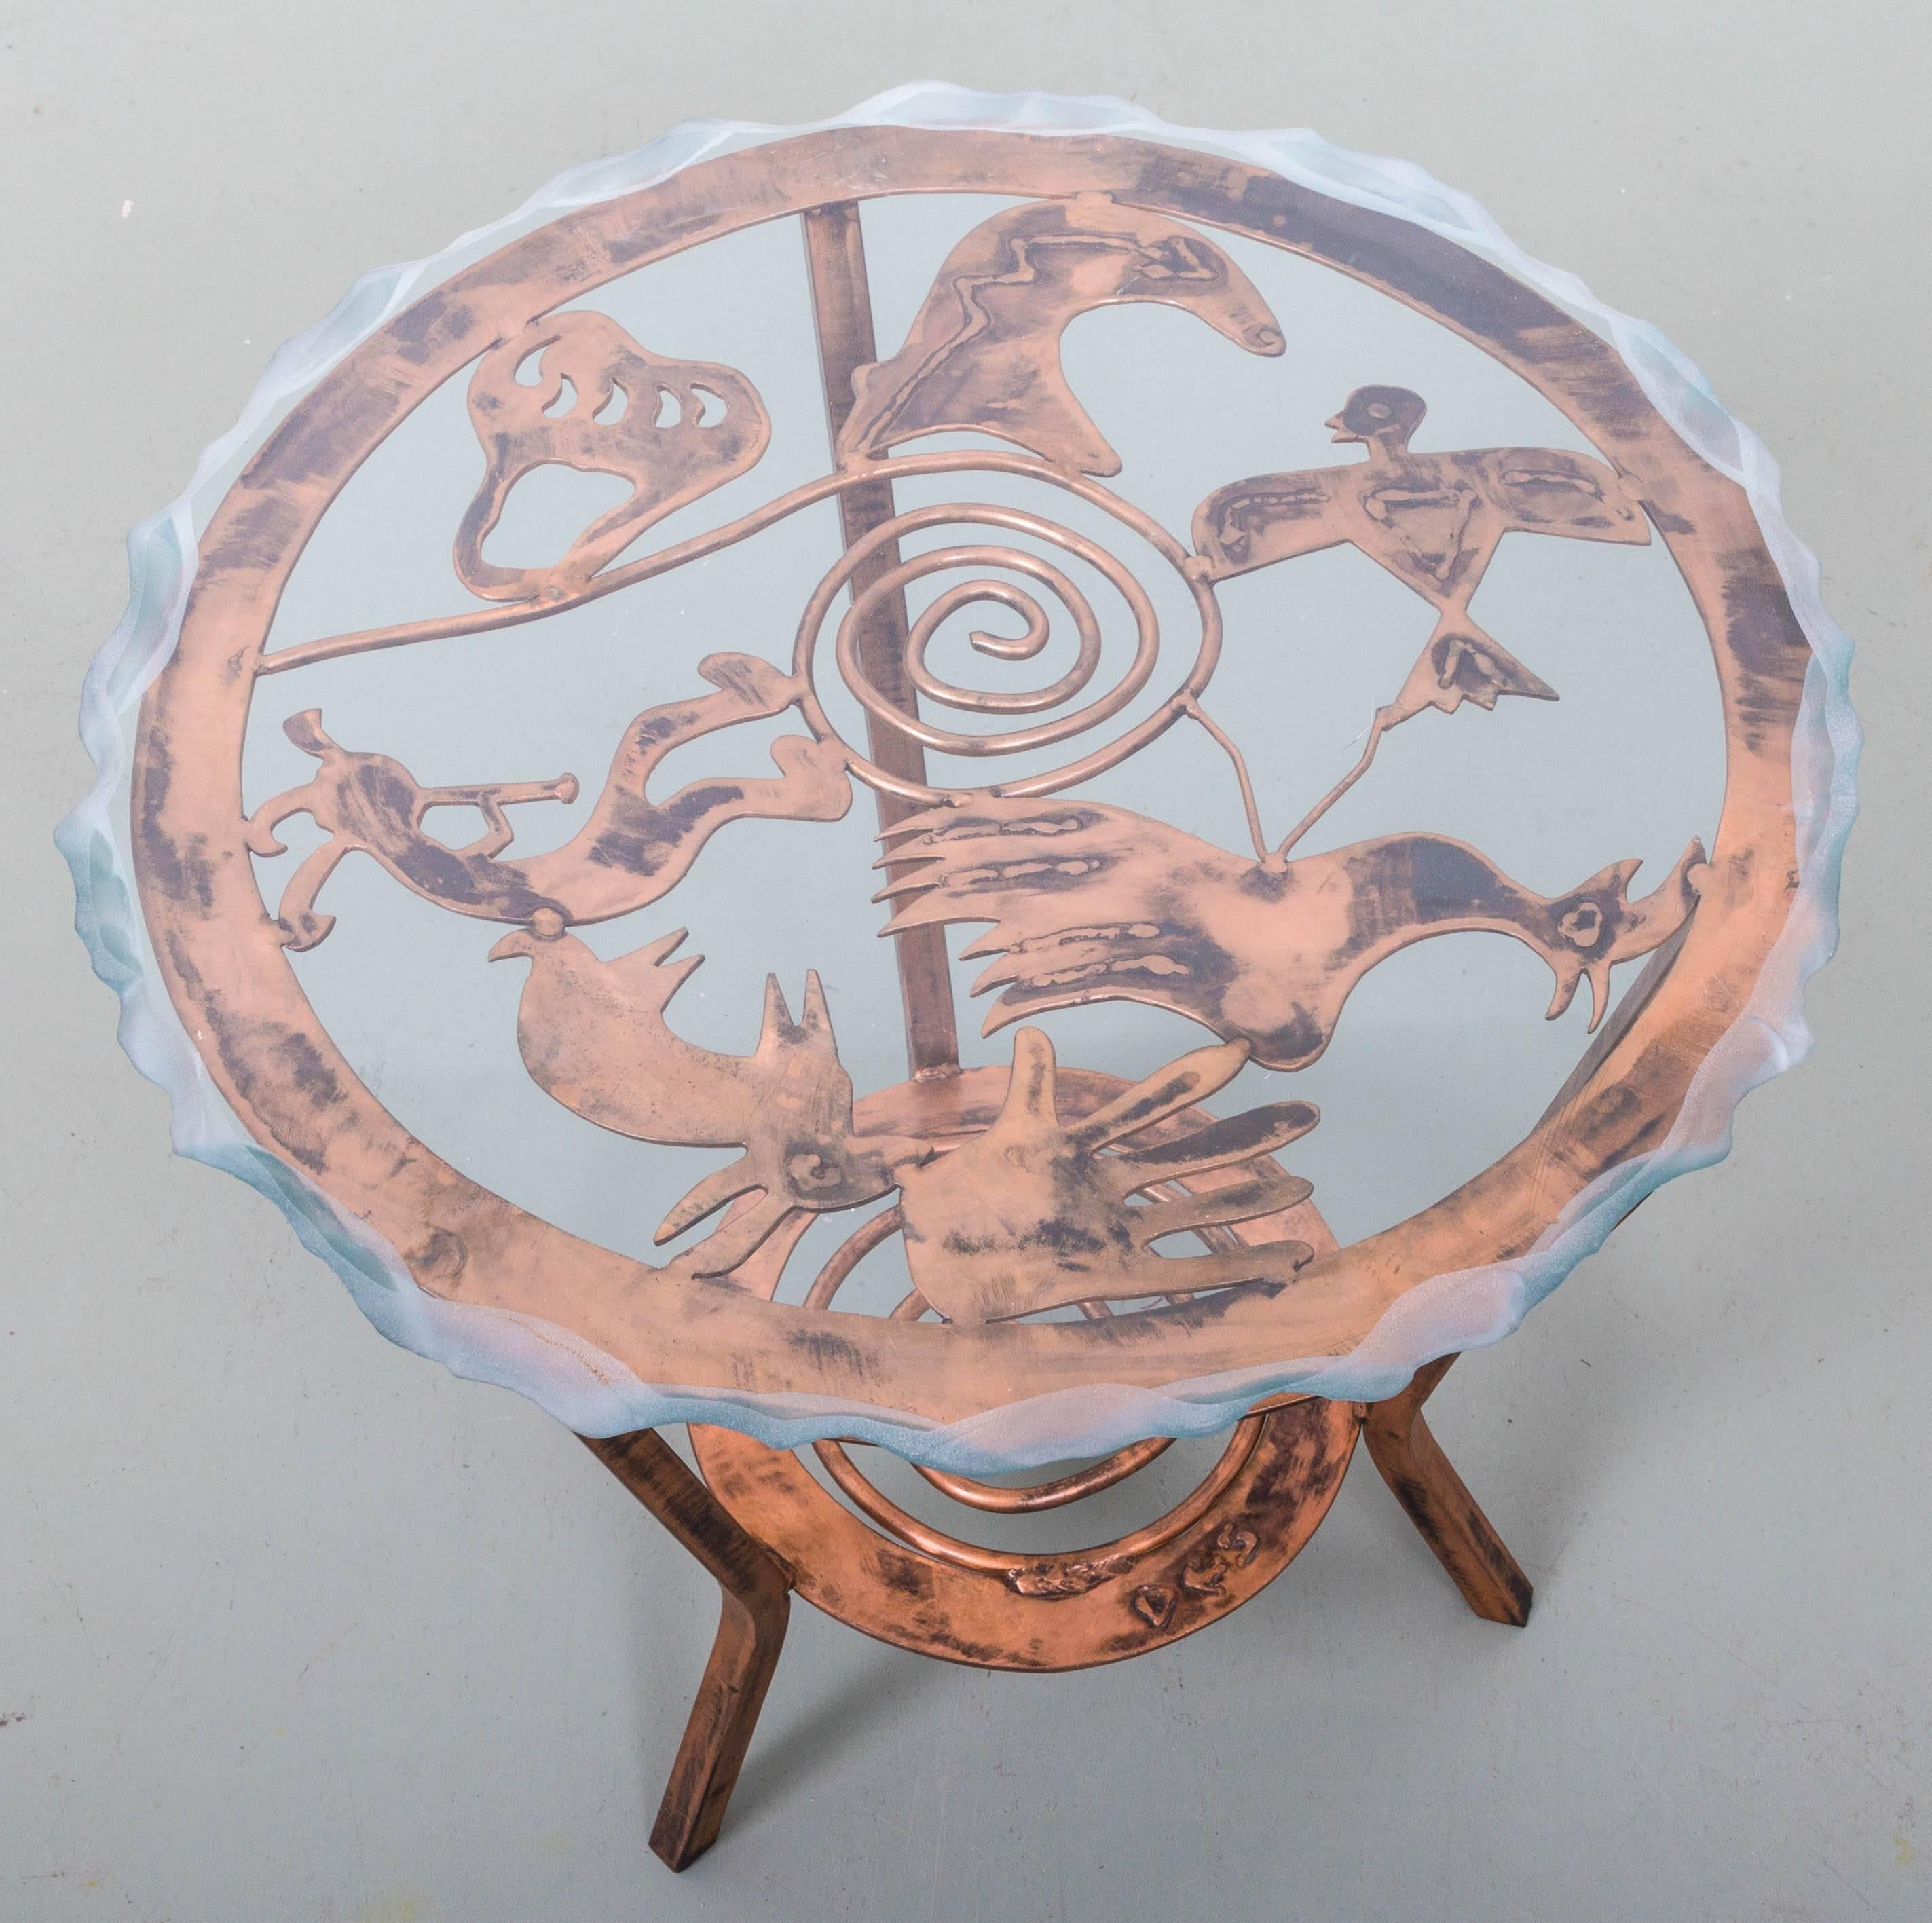 Copper three-leg two-tier table with spiral design and stylized Native American motifs, bear paw, eagle, dancing musician, phoenix bird, rabbit and bear. Fire finished glass top.